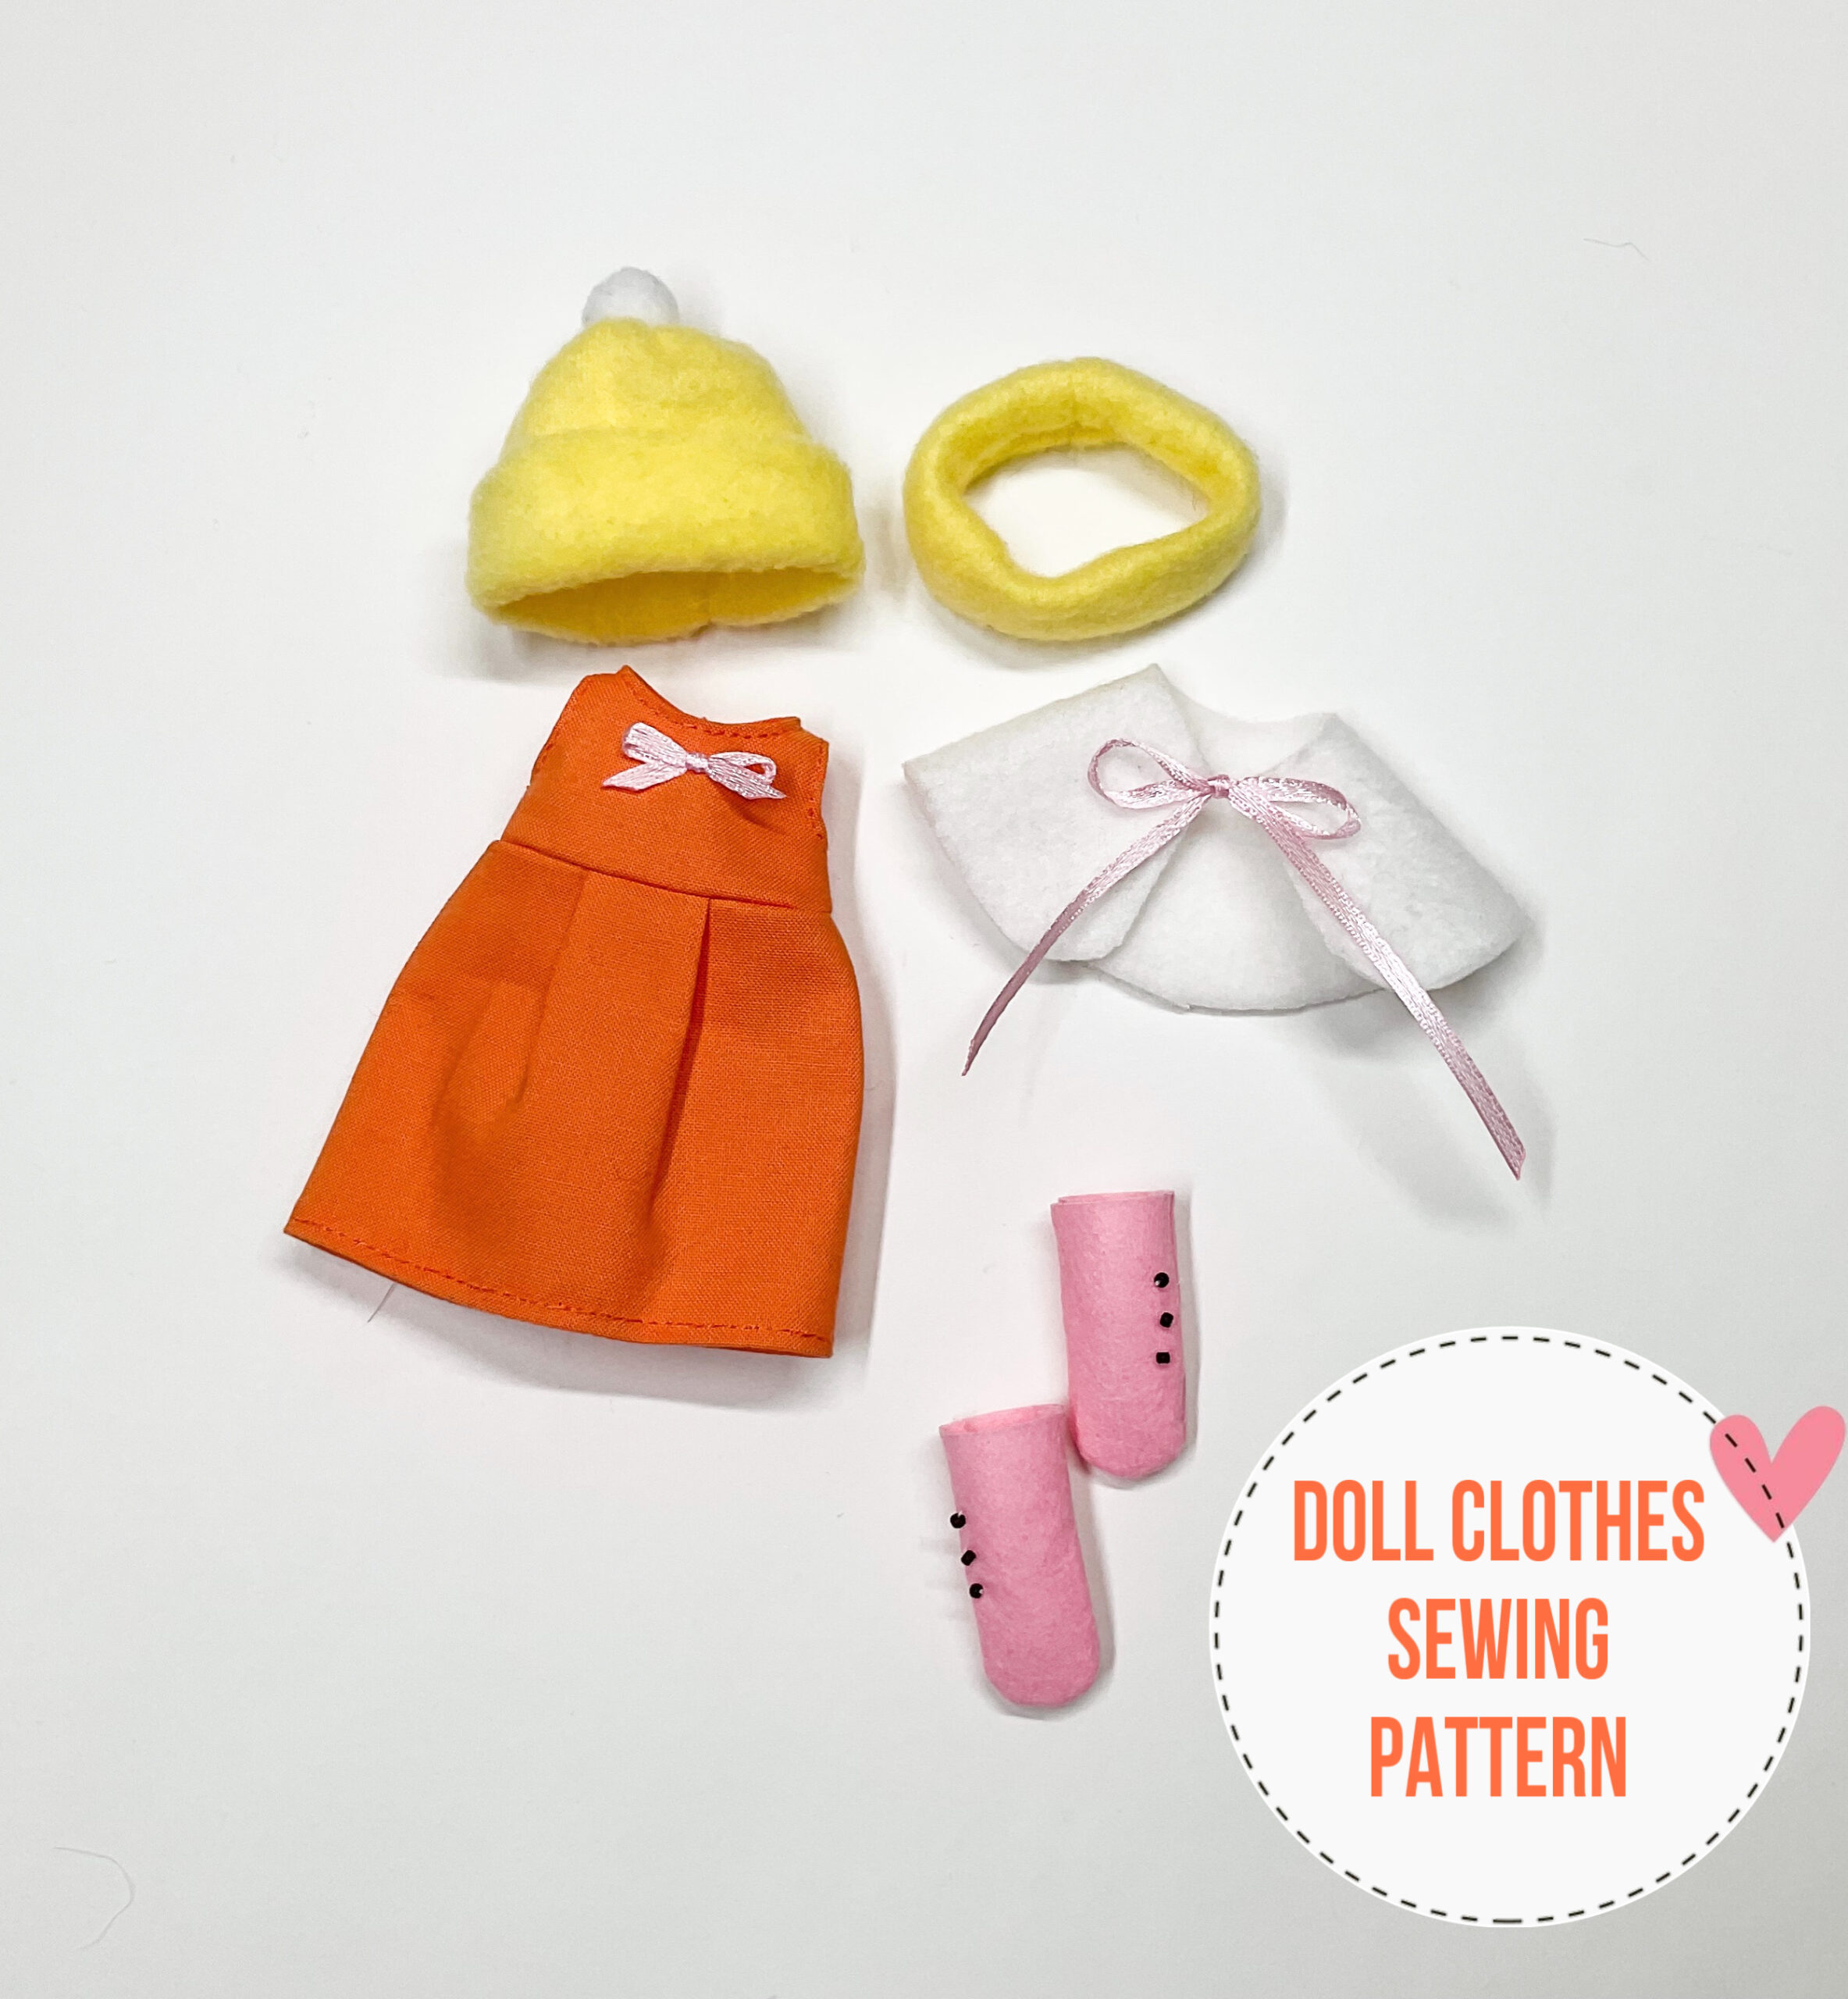 Make a no-sew doll sundress - 100 Directions